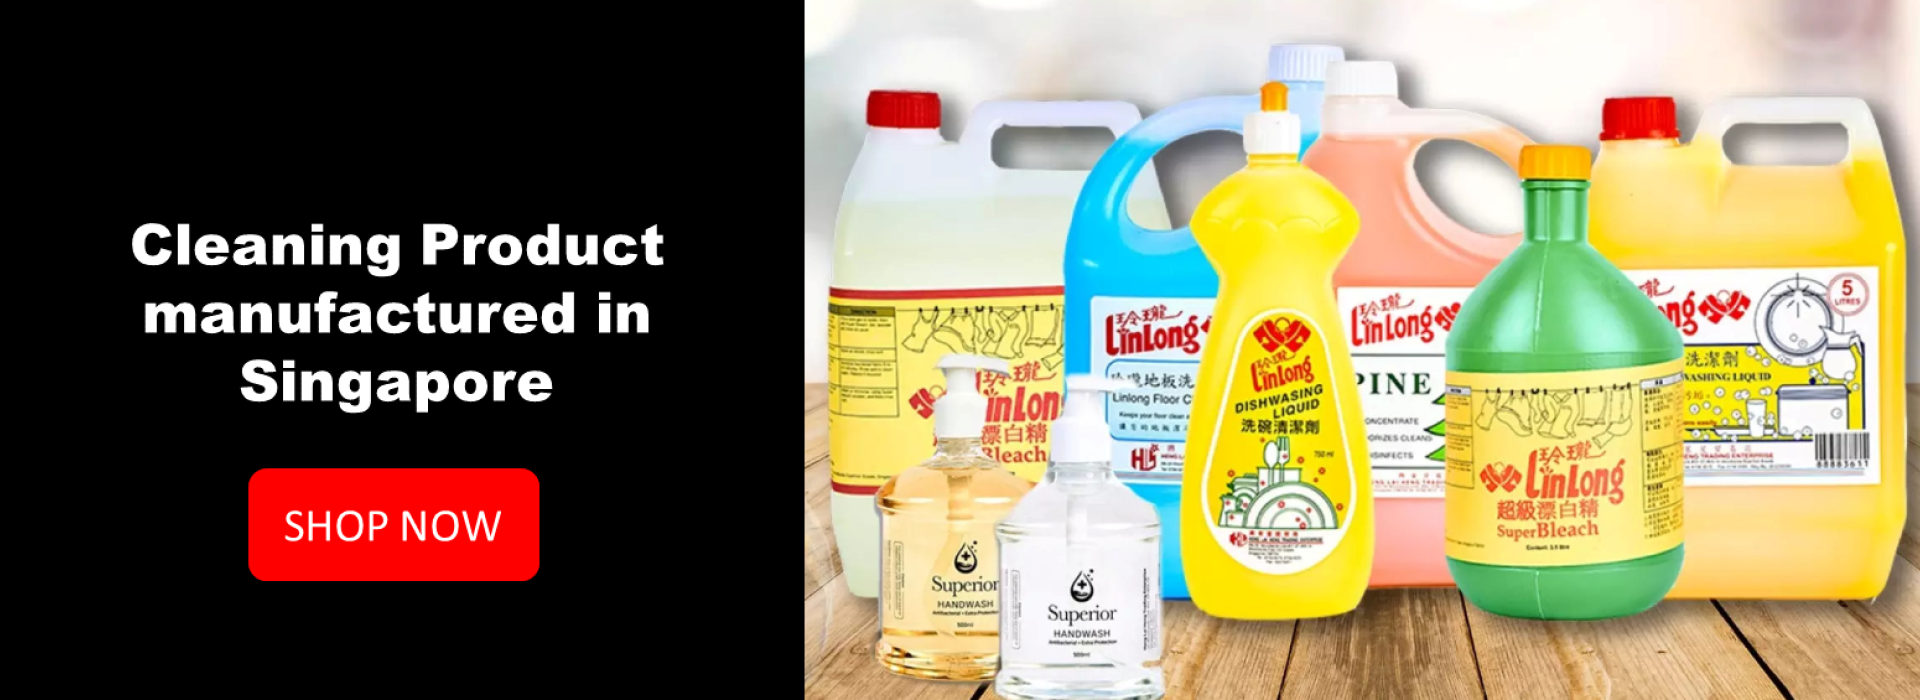 Local Brand Cleaning Products